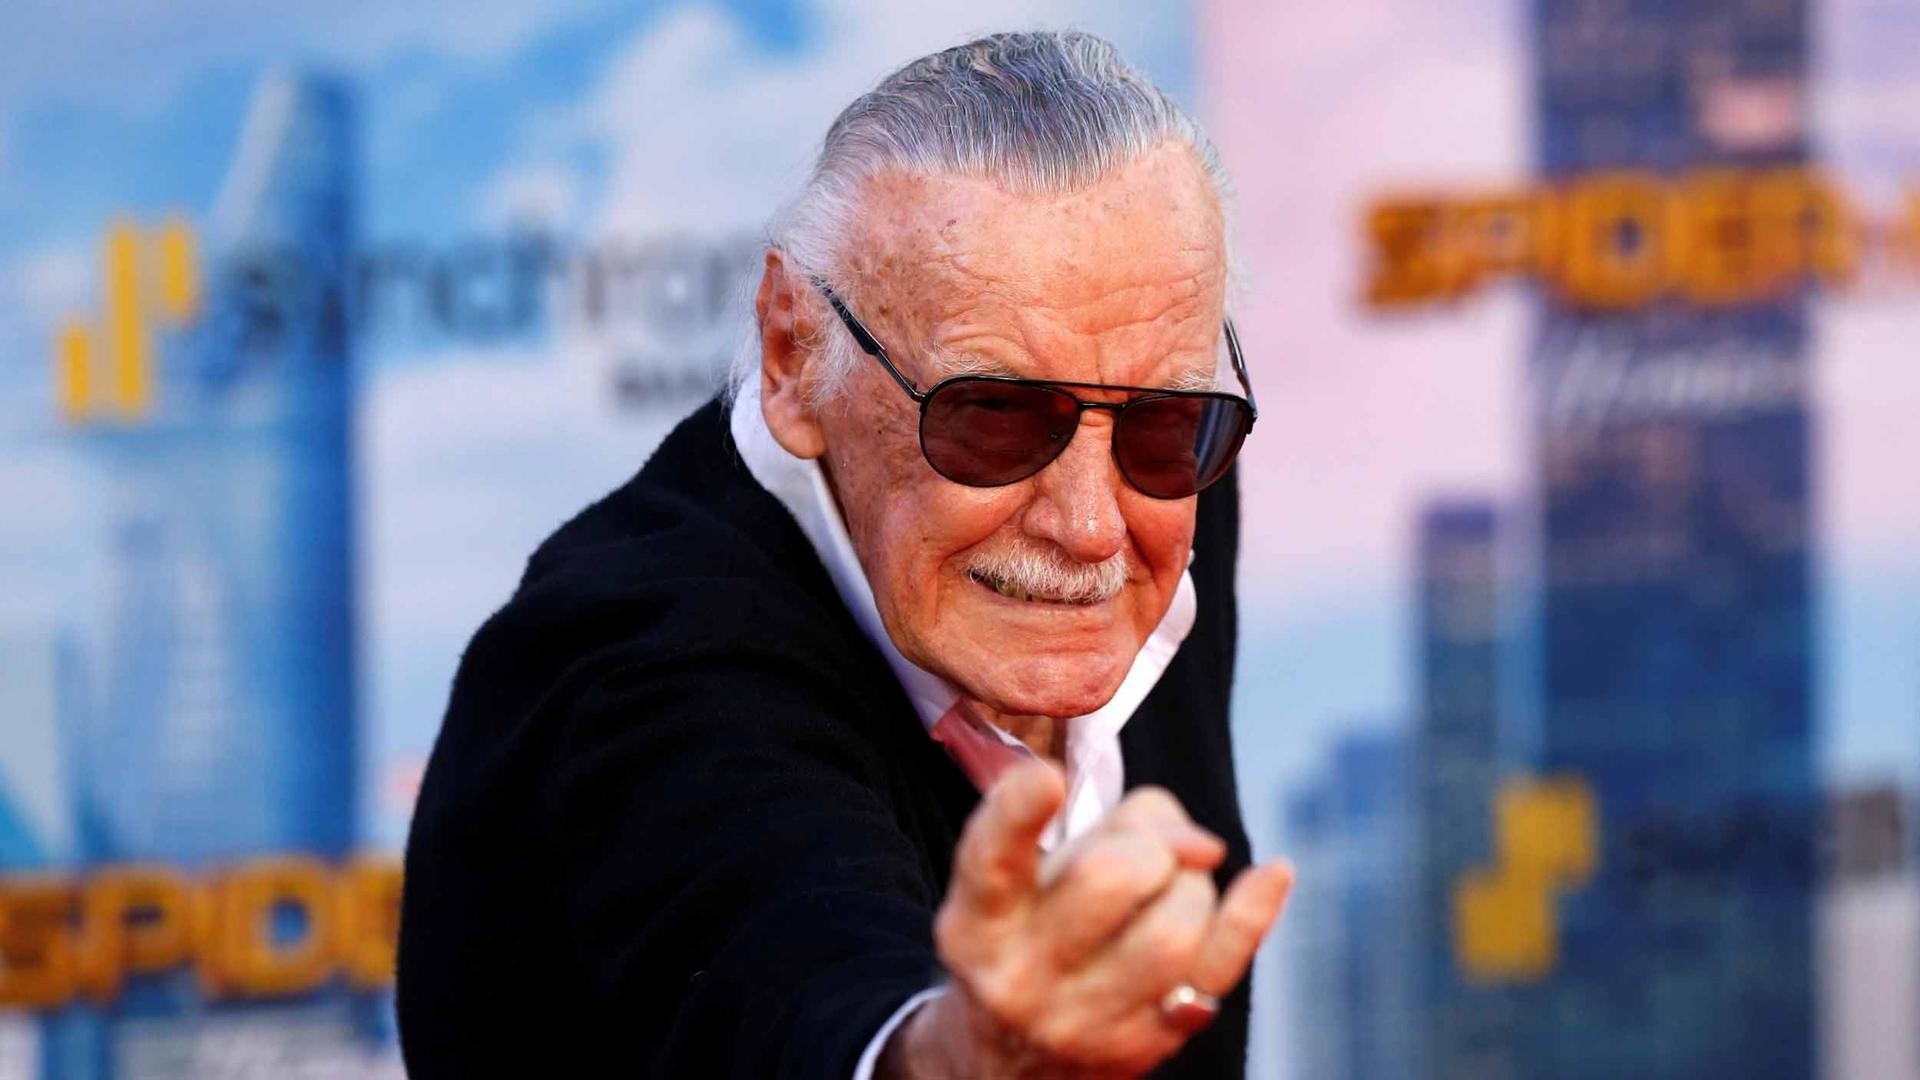 Stan Lee poses like Spiderman shooting a web from his wrist